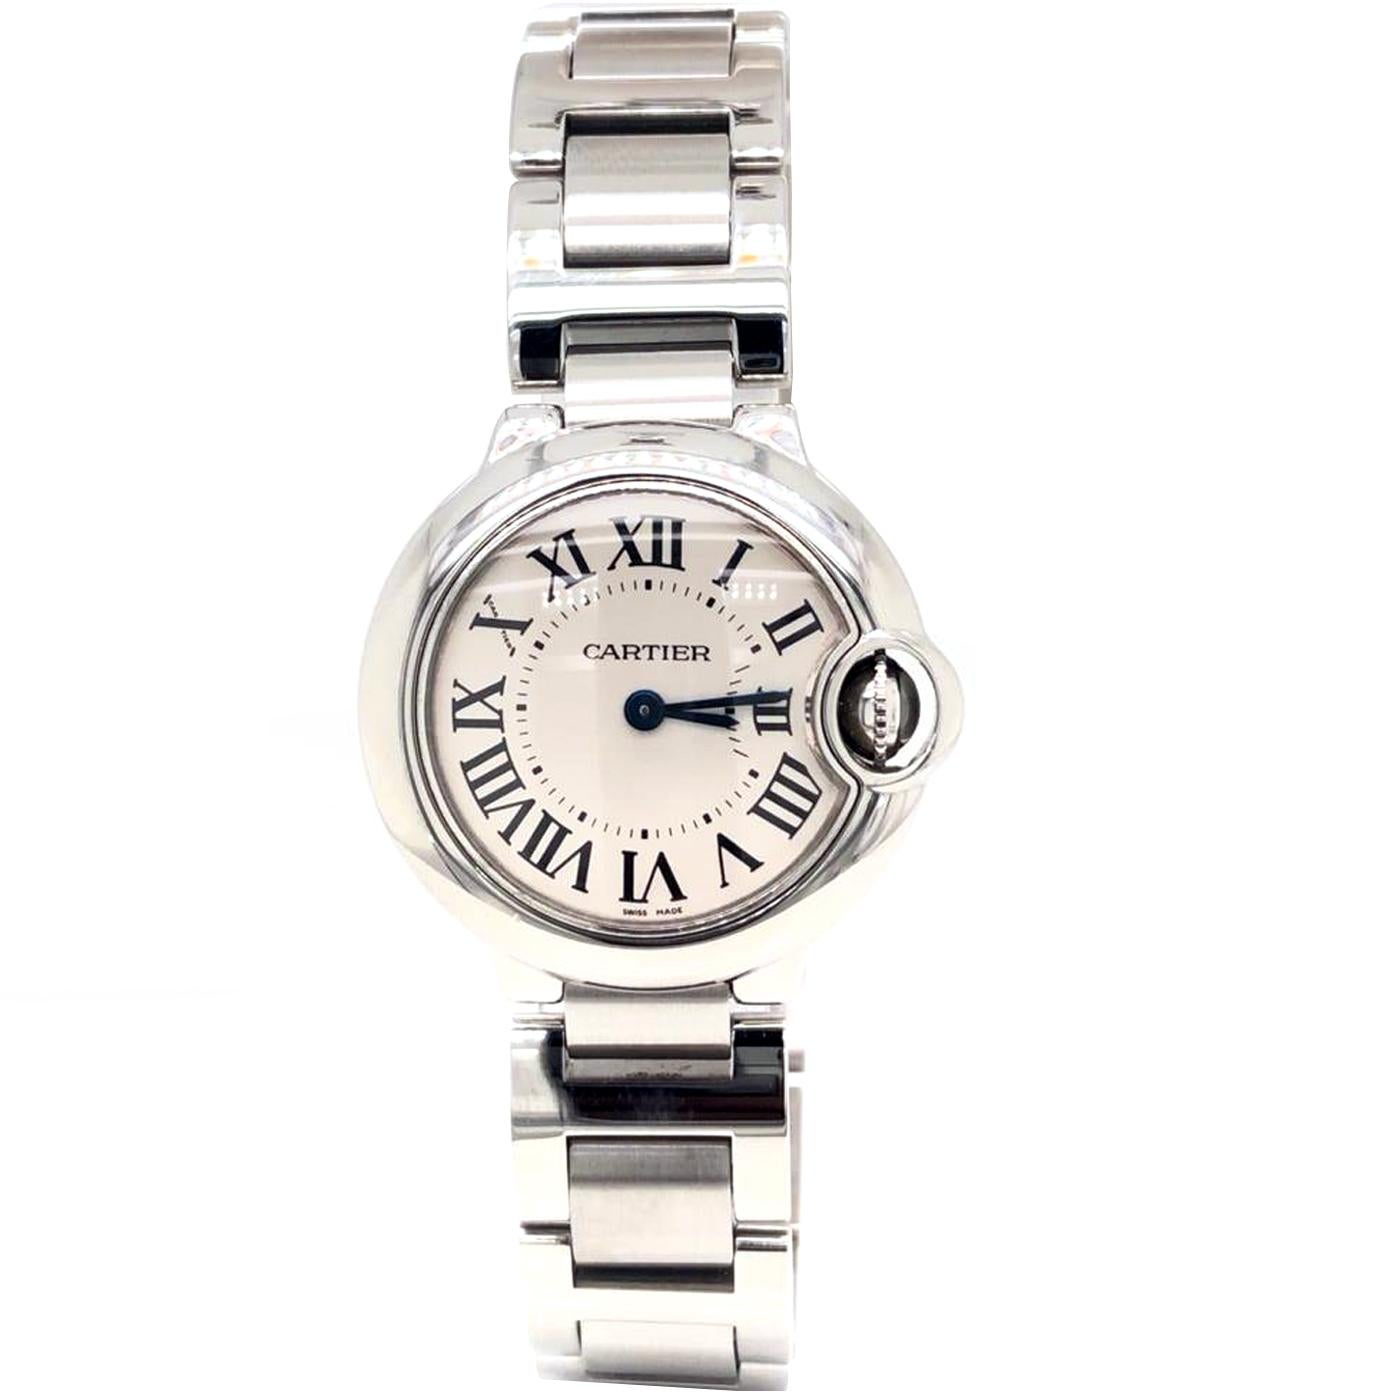 Ballon Bleu de Cartier watch, 28 mm, quartz movement. Steel case, fluted crown set with a synthetic spinel cabochon, silvered opaline dial, Roman numerals, blued-steel sword-shaped hands, sapphire crystal, steel bracelet.

Floating like a balloon